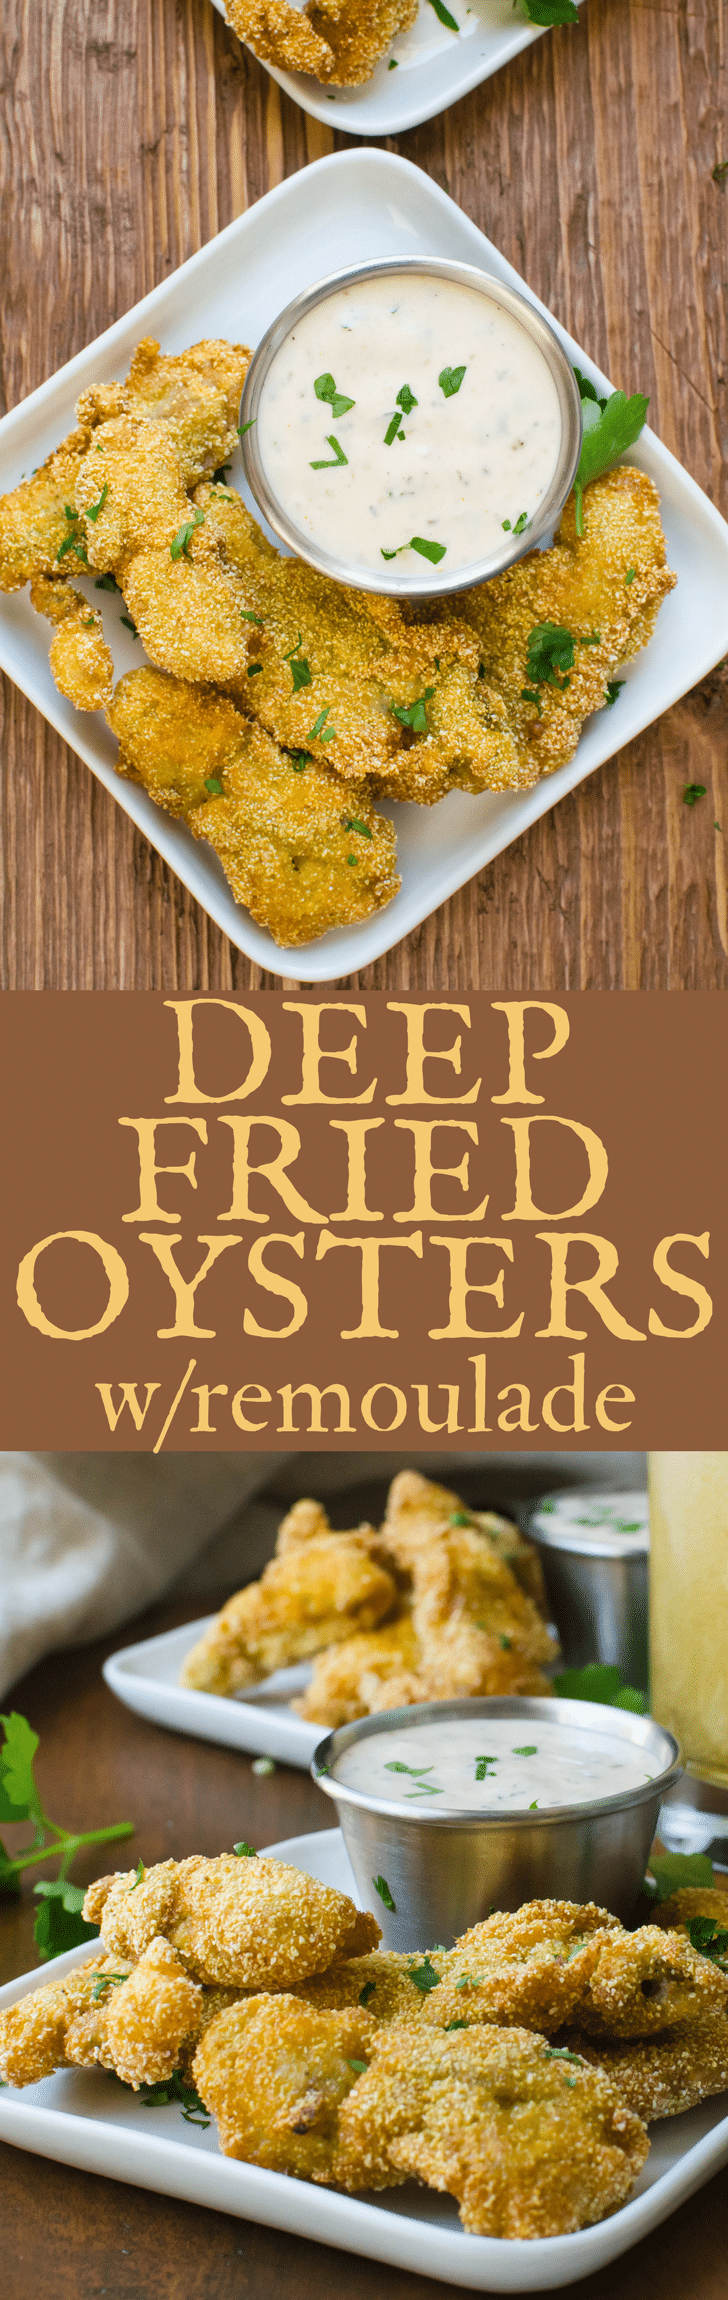 If you like fried seafood, you'll love these Deep Fried Oysters with Remoulade. This simple oyster appetizer with easy remoulade sauce is like a weekend trip to the shore. #oysters #friedoysters #deepfriedoysters #cornmealfriedoysters #cornmealcrustedoysters #friedseafood #appetizer #seafoodappetizer #friedseafoodappetizer #friedoysterappetizer #oysterrecipe #friedoysterrecipe #howtomakeremouladesauce #remoulade #remouladesauce #howtofryoysters